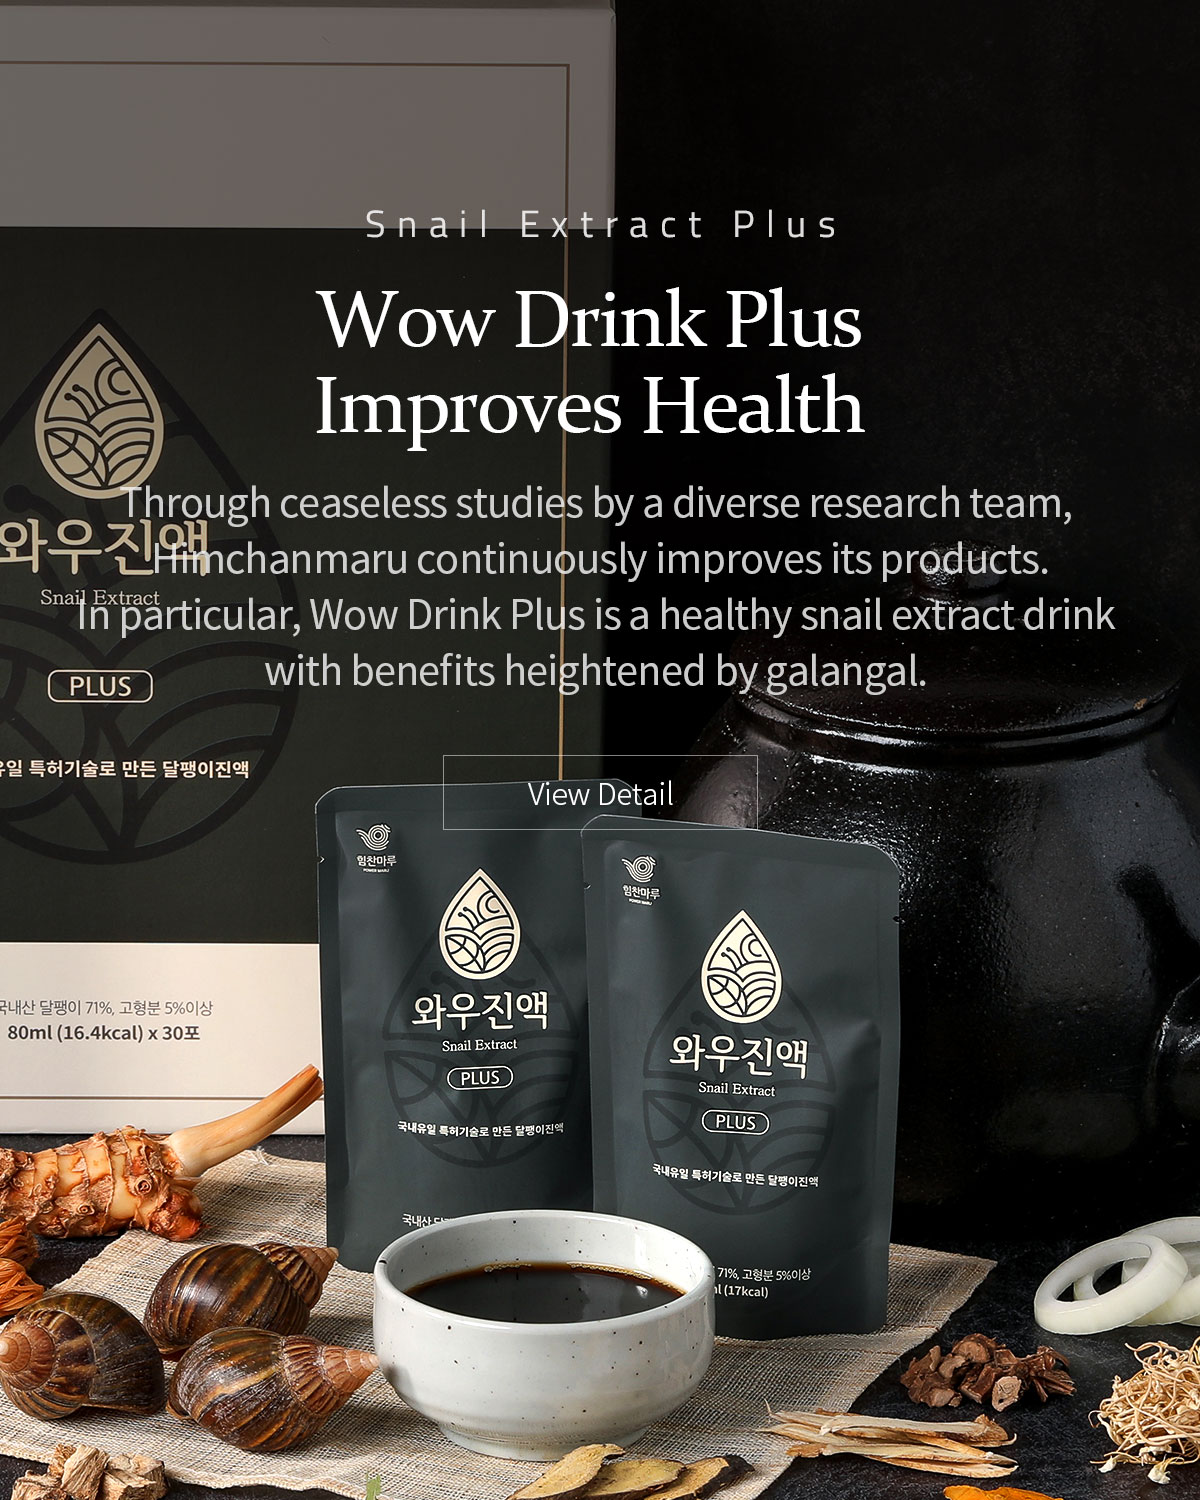 Wow Drink Plus Improves Health. Through ceaseless studies by a diverse research team, Himchanmaru continuously improves its products. In particular, Wow Drink Plus is a healthy snail extract drink with benefits heightened by galangal. .